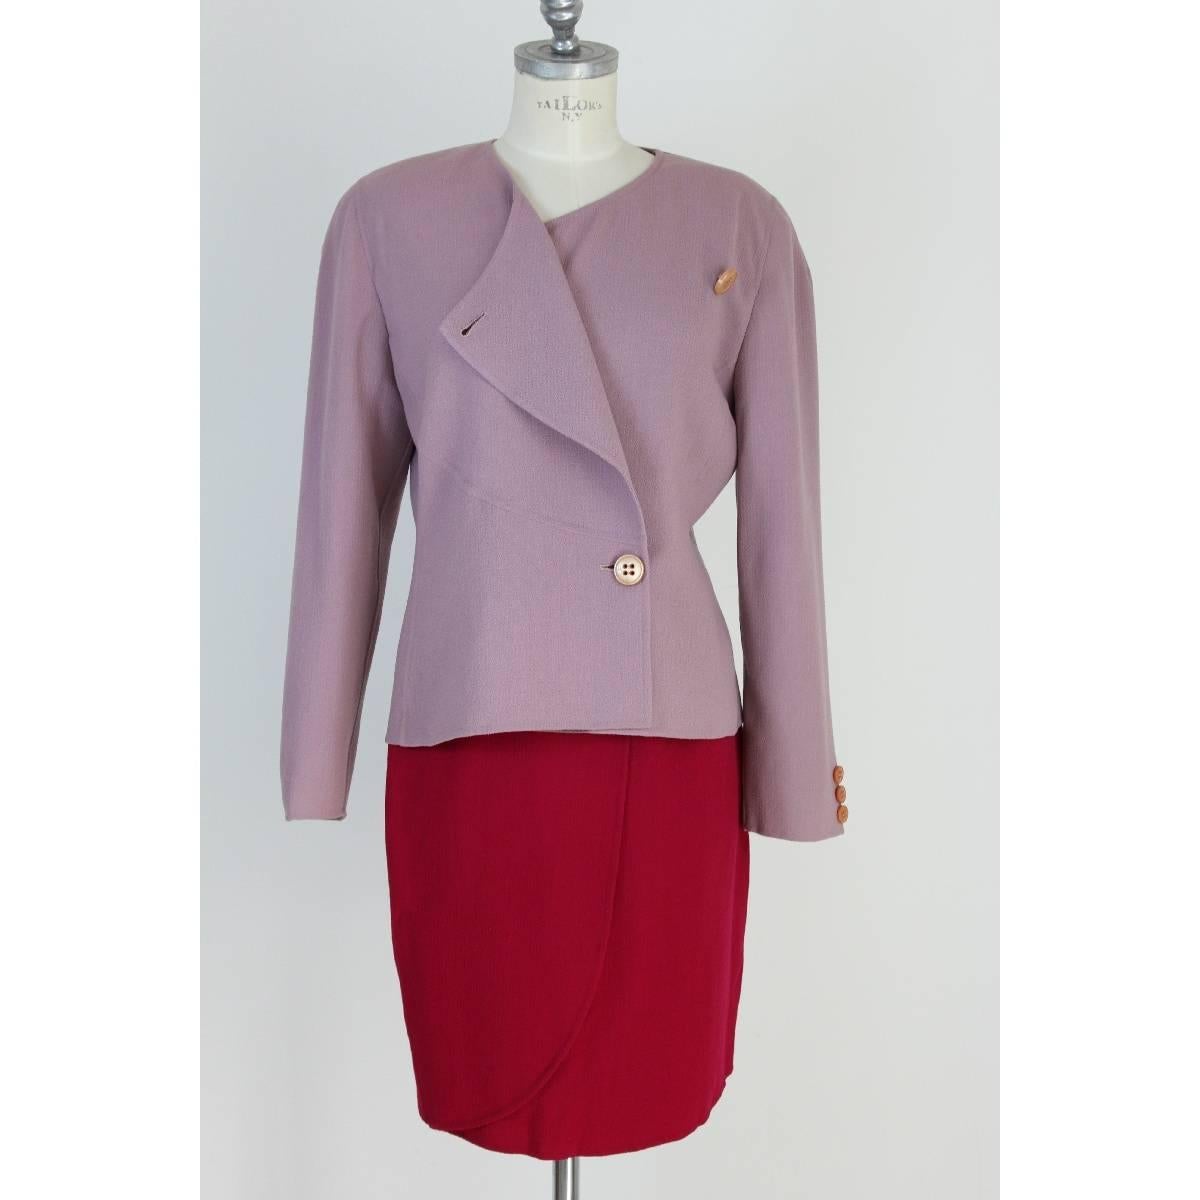 NWT Mila Schon vintage 1980s skirt tulip suit tailleur women’s fucsia and purple In New Condition For Sale In Brindisi, IT